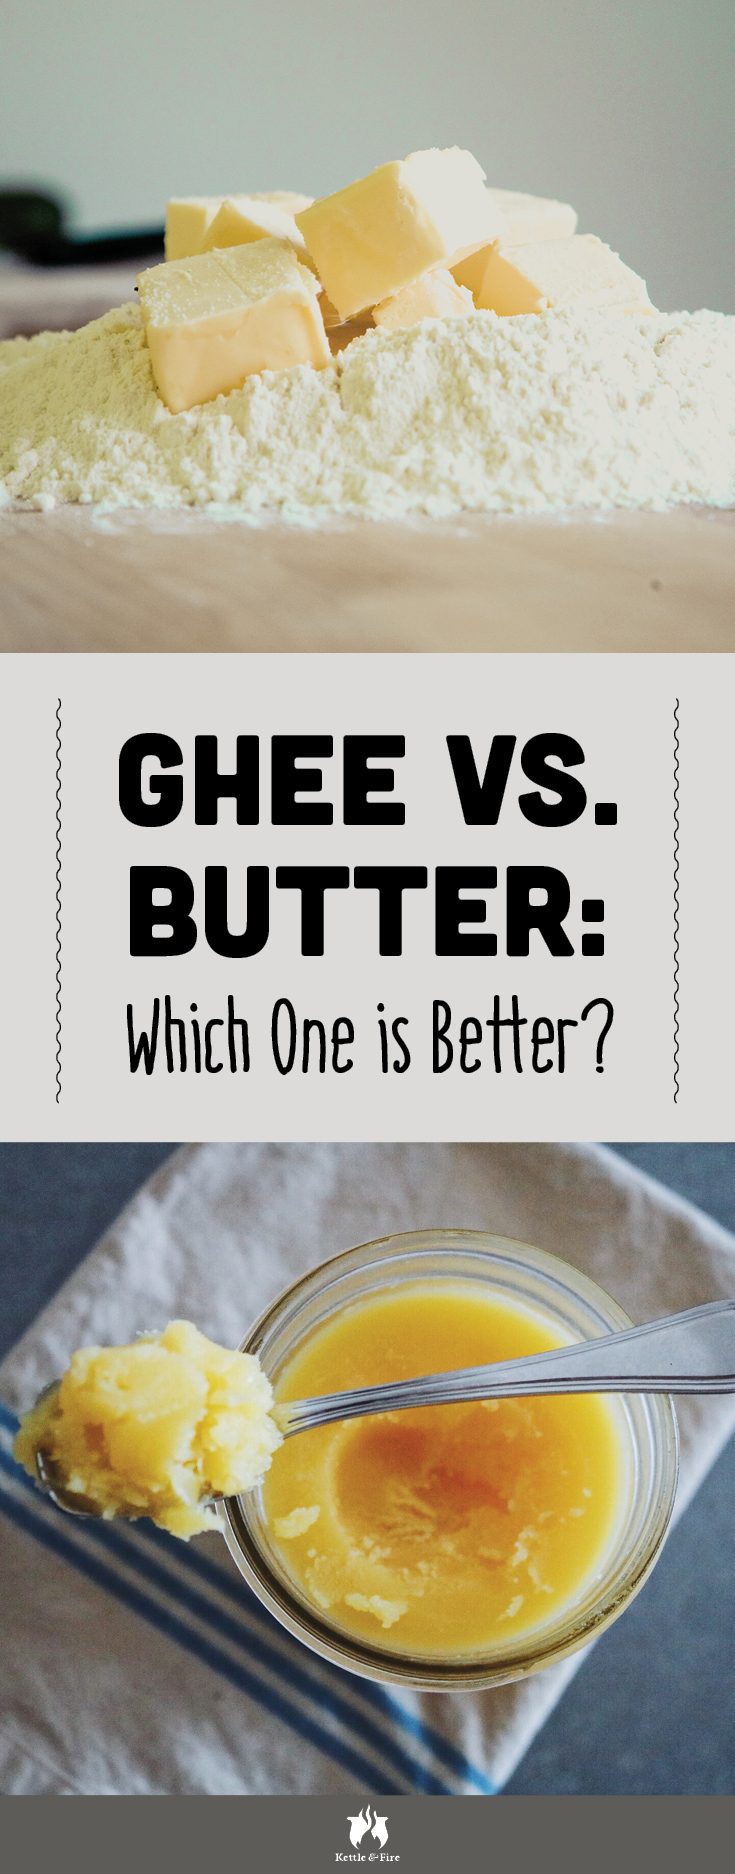 Ghee vs butter: what are the key differences? What are the health benefits of ghee? Is ghee better than butter? We've got all your questions answered.